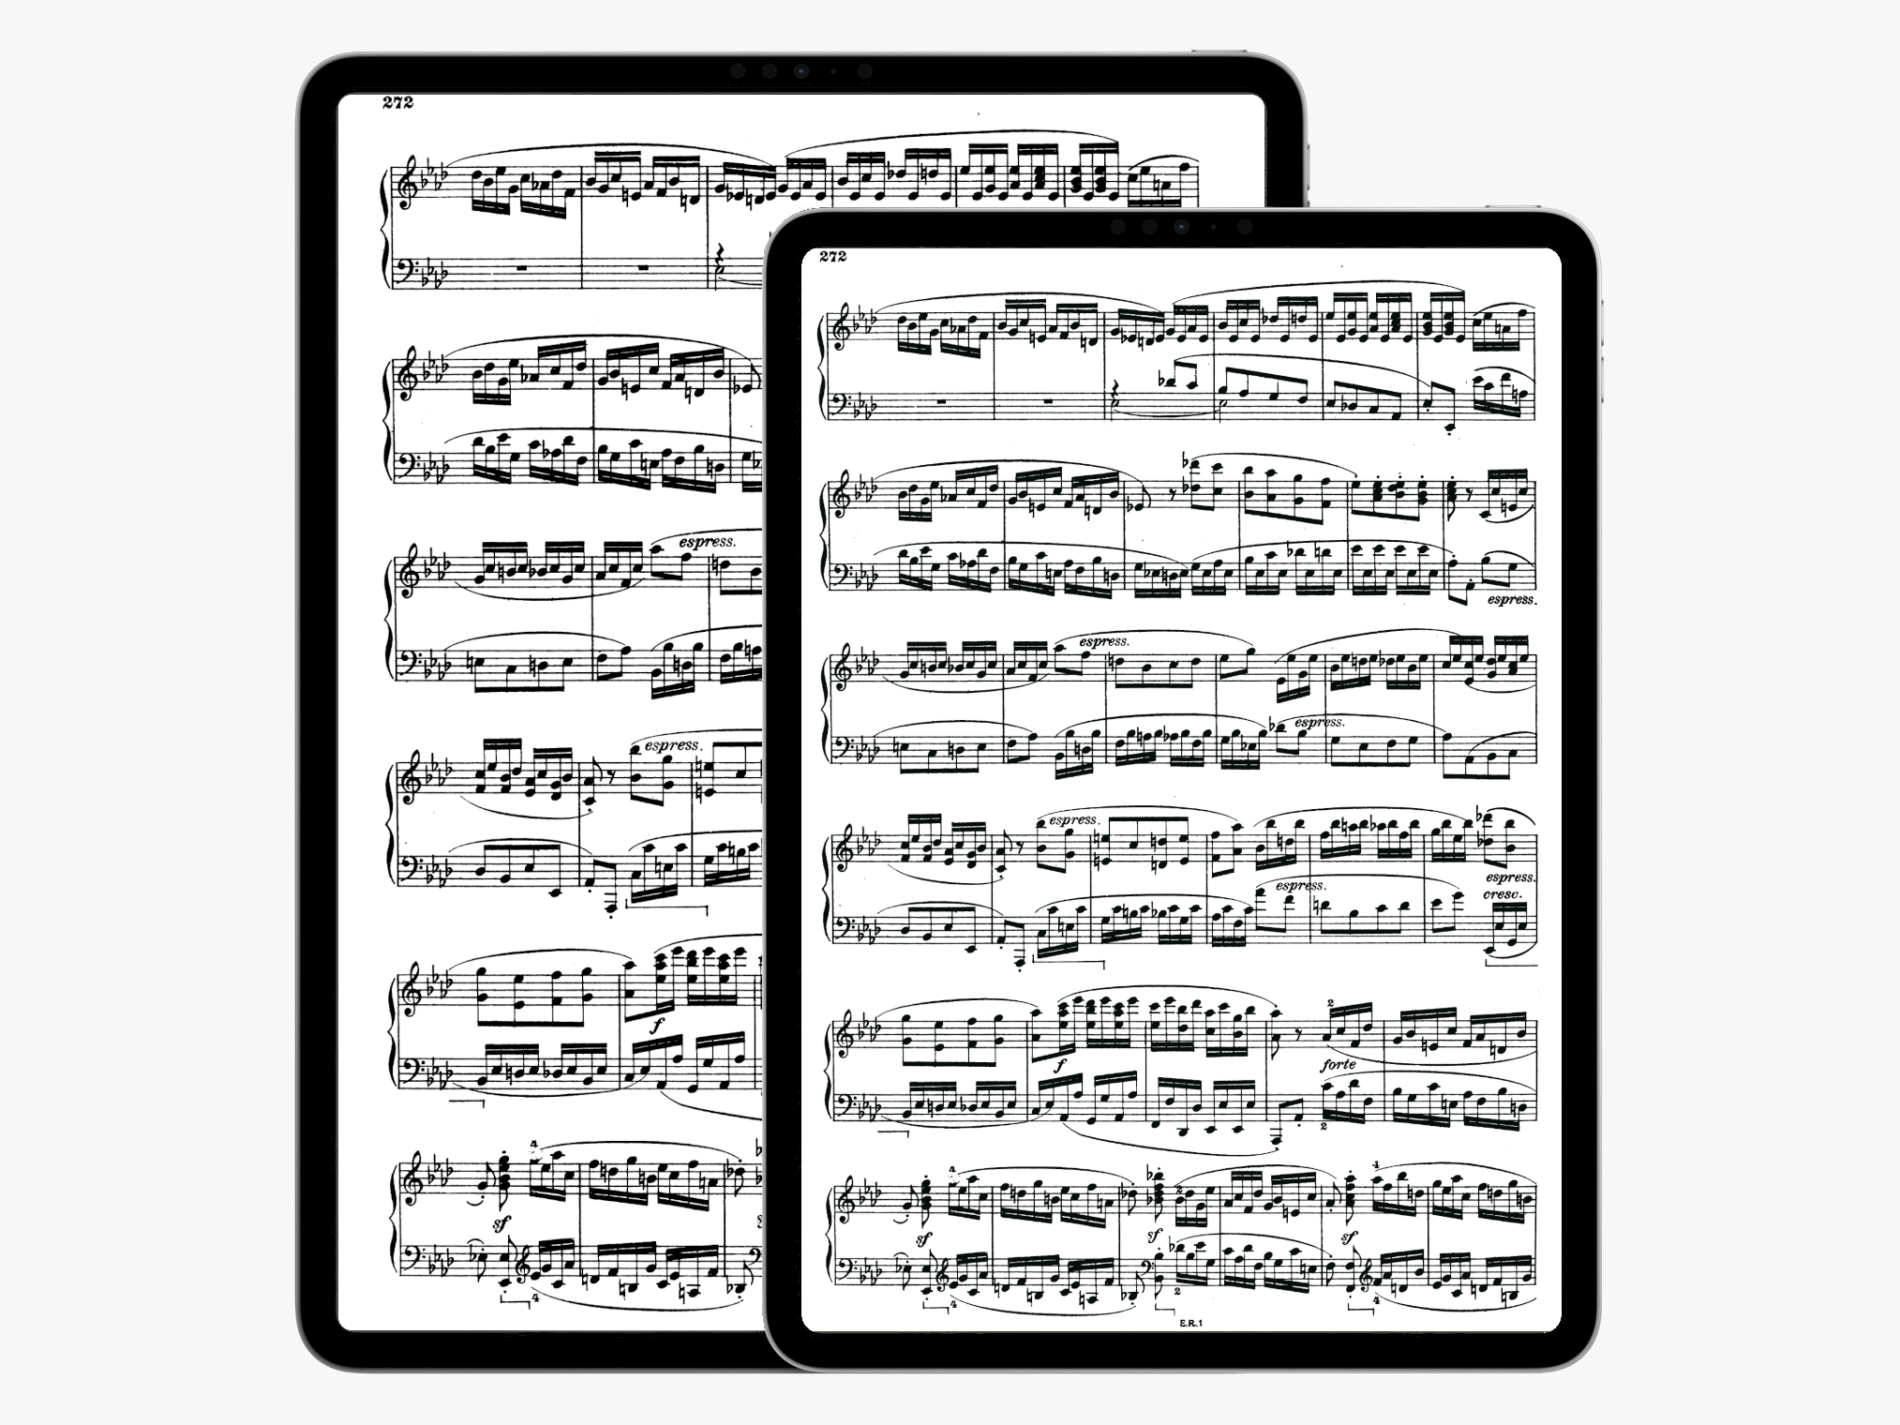 Apple iPad Pro 12.9 vs 11 inches for music (display scores and parts with forScore)